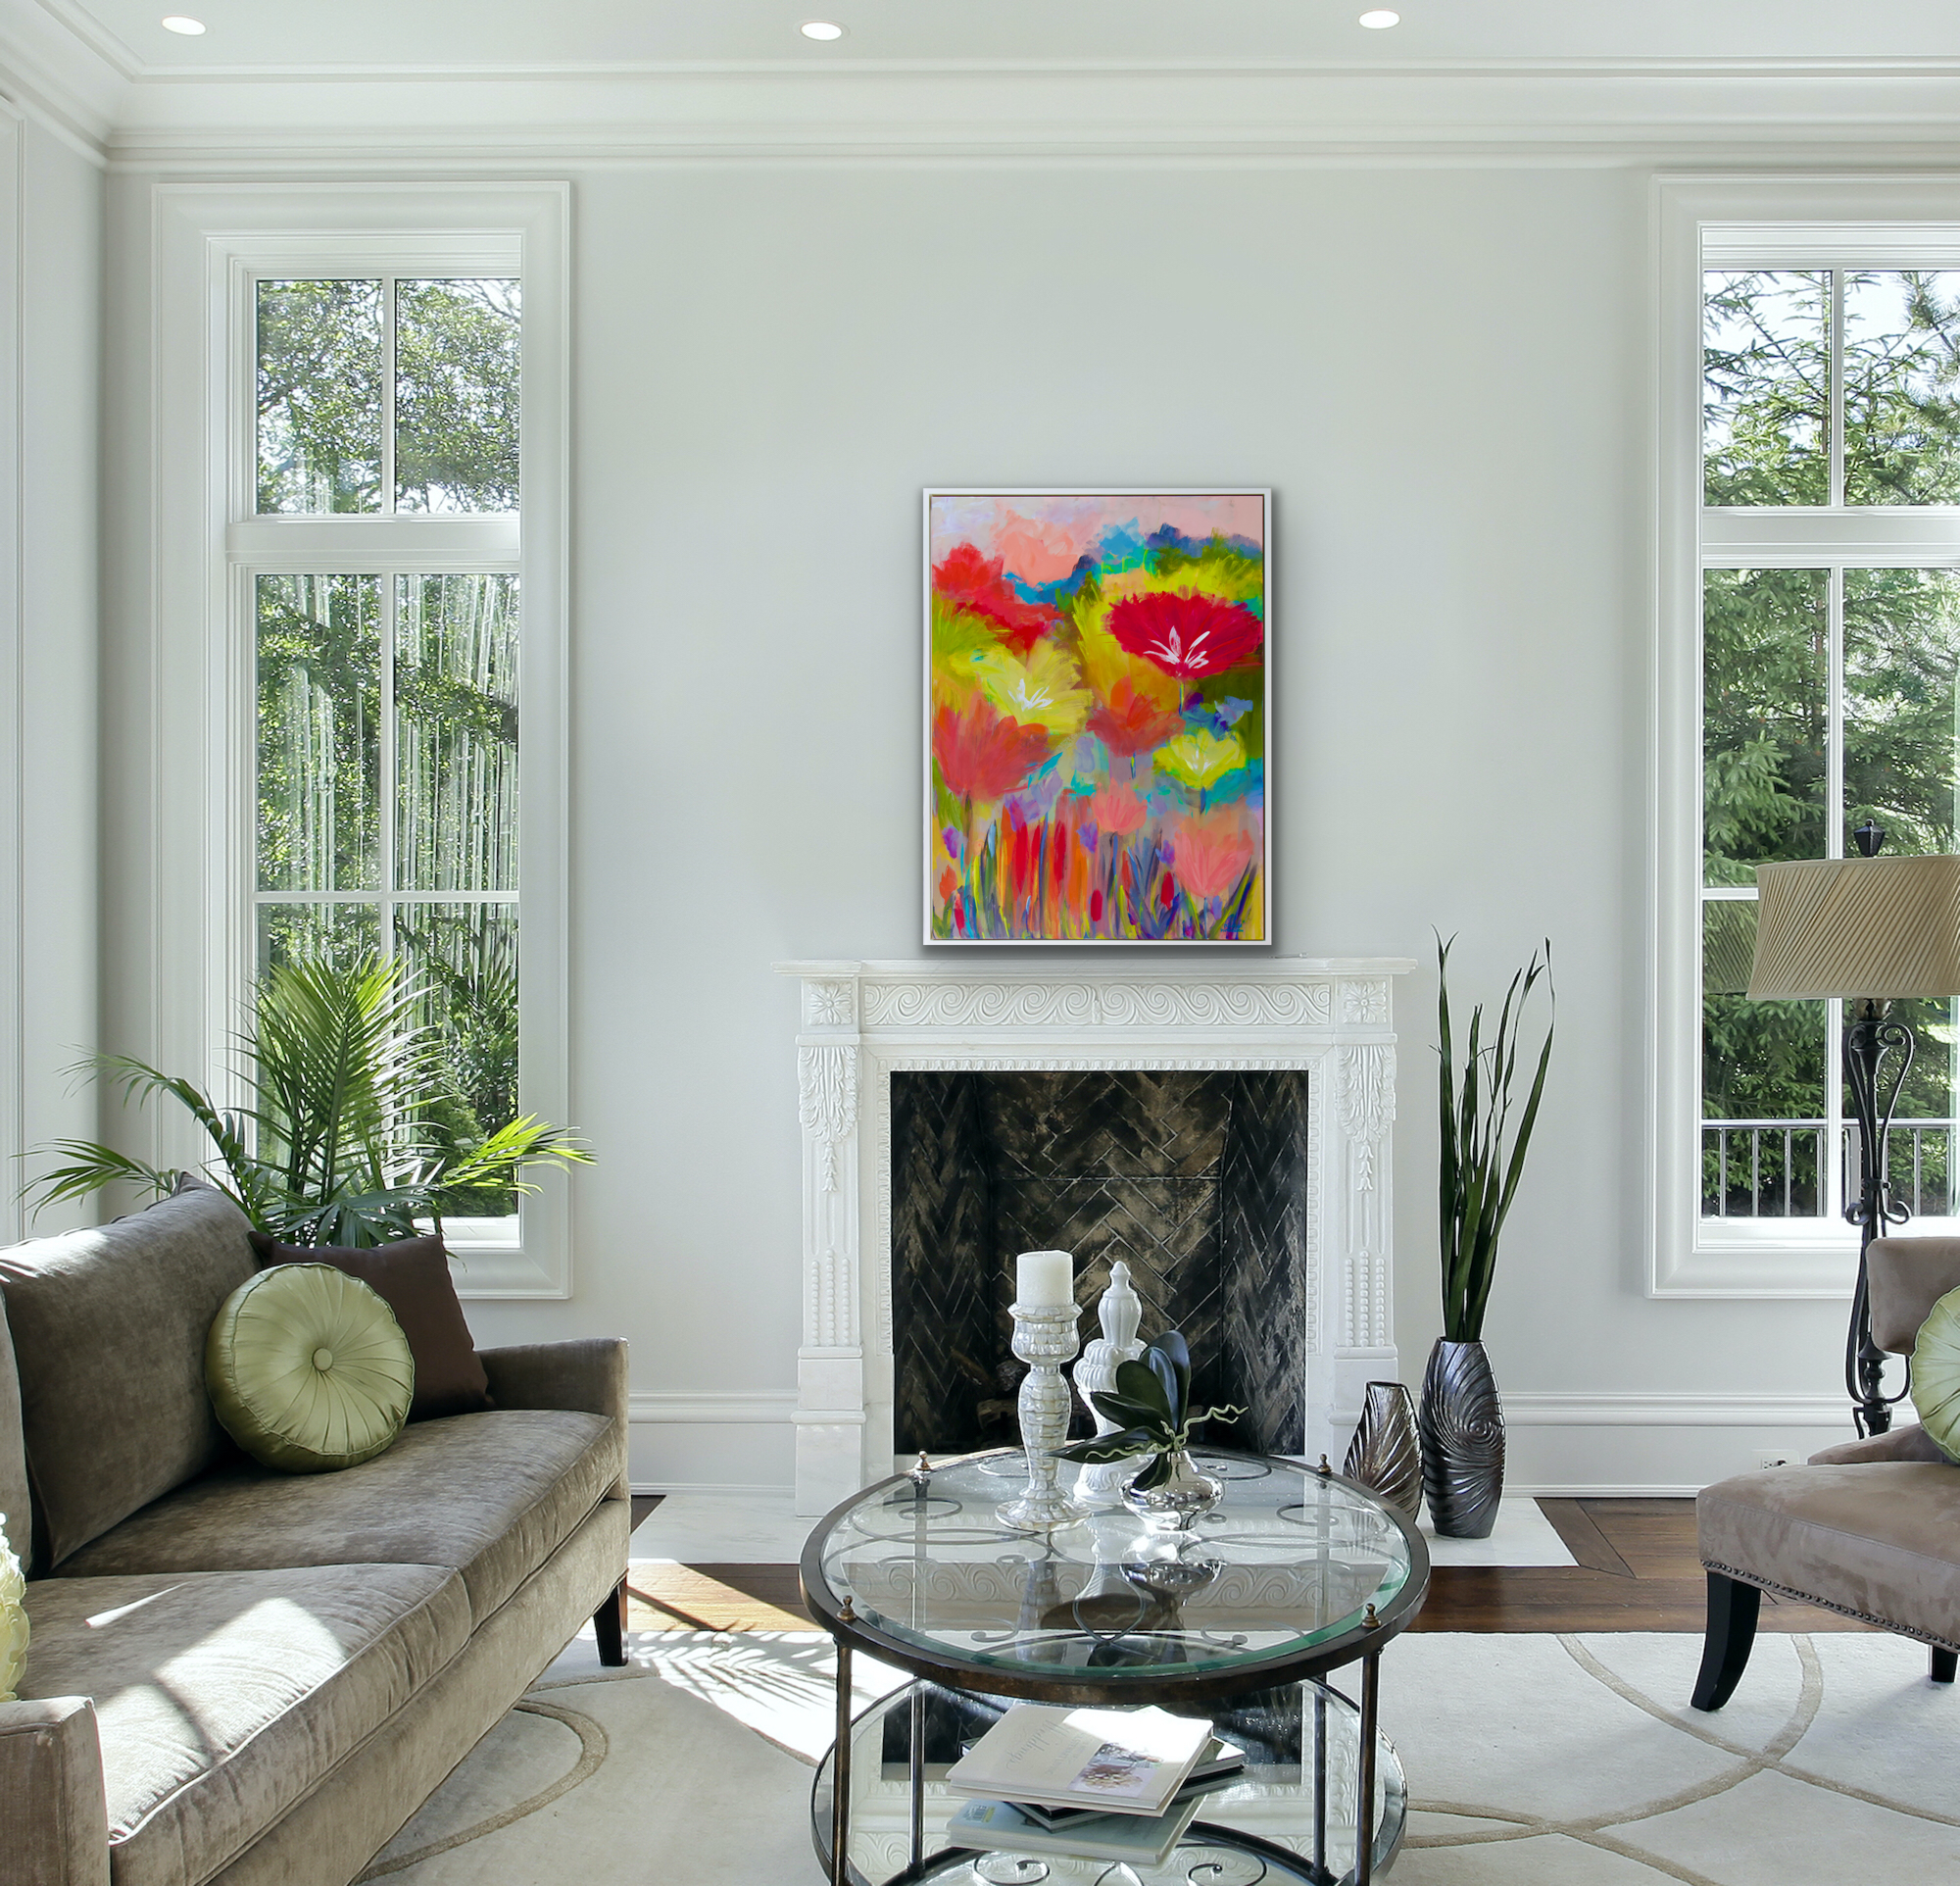 Abstract floral shown above a white fireplace with windows on either side.